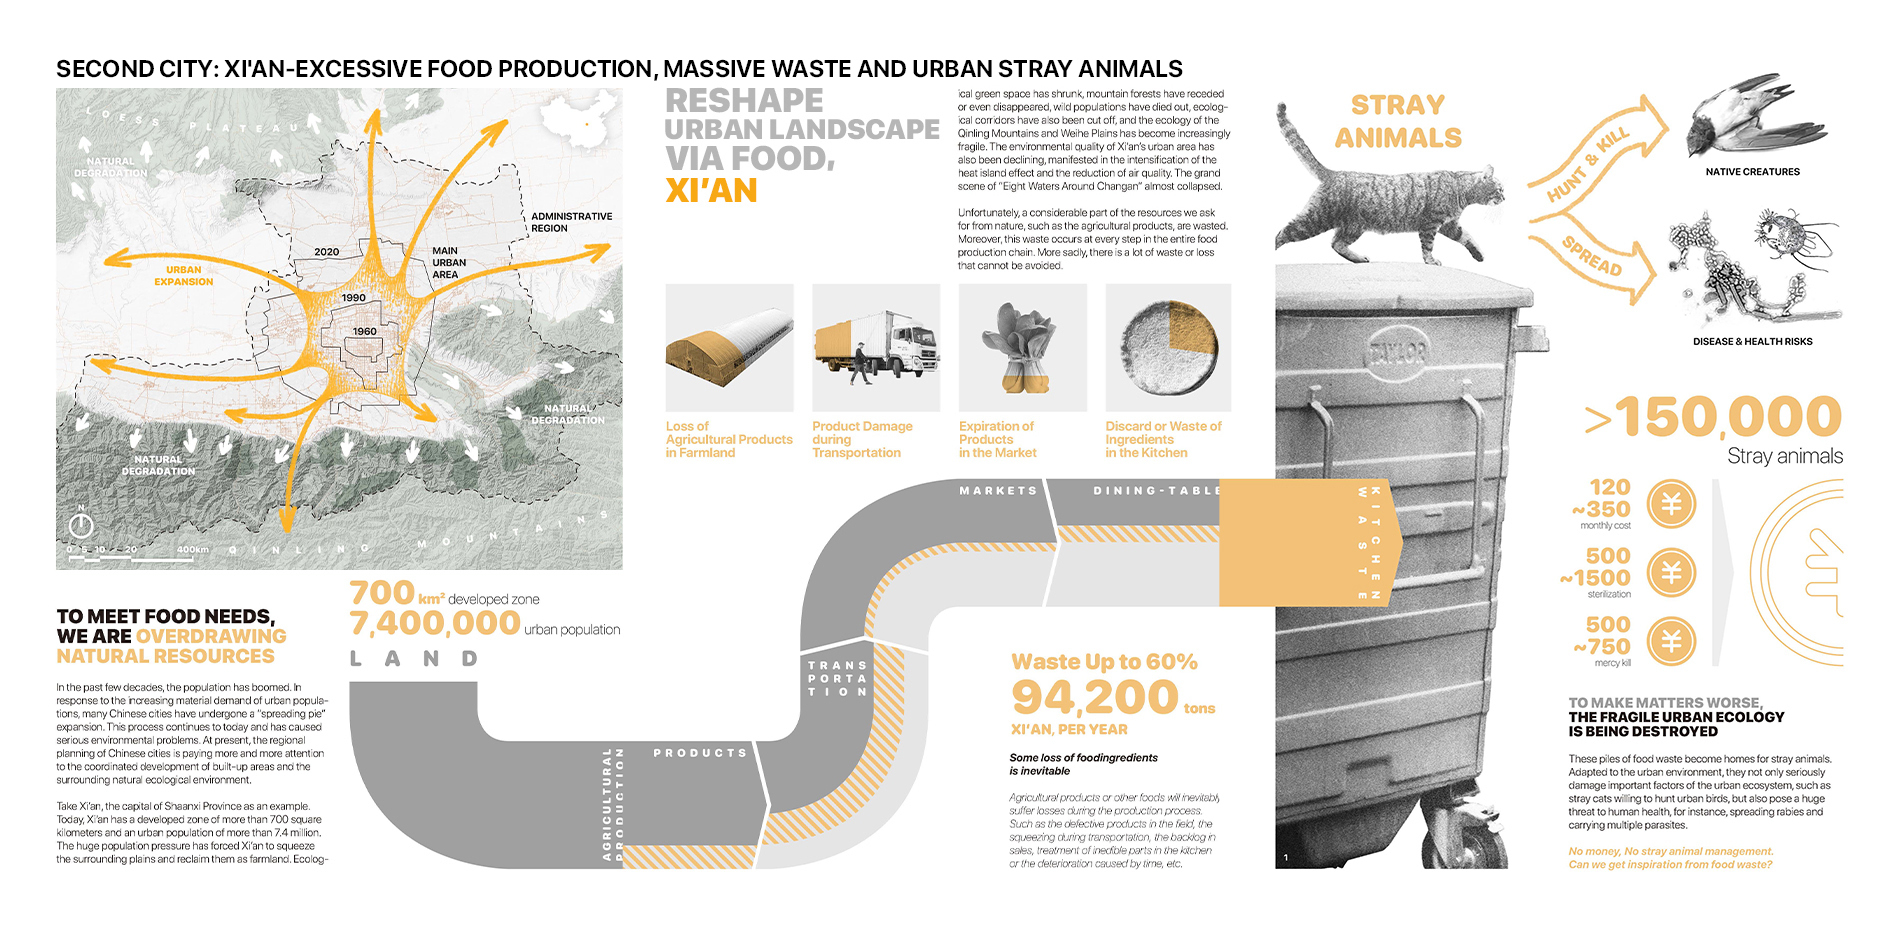 Excessive Food Production, Massive Waste and Urban Stray Animals (Xi'an)